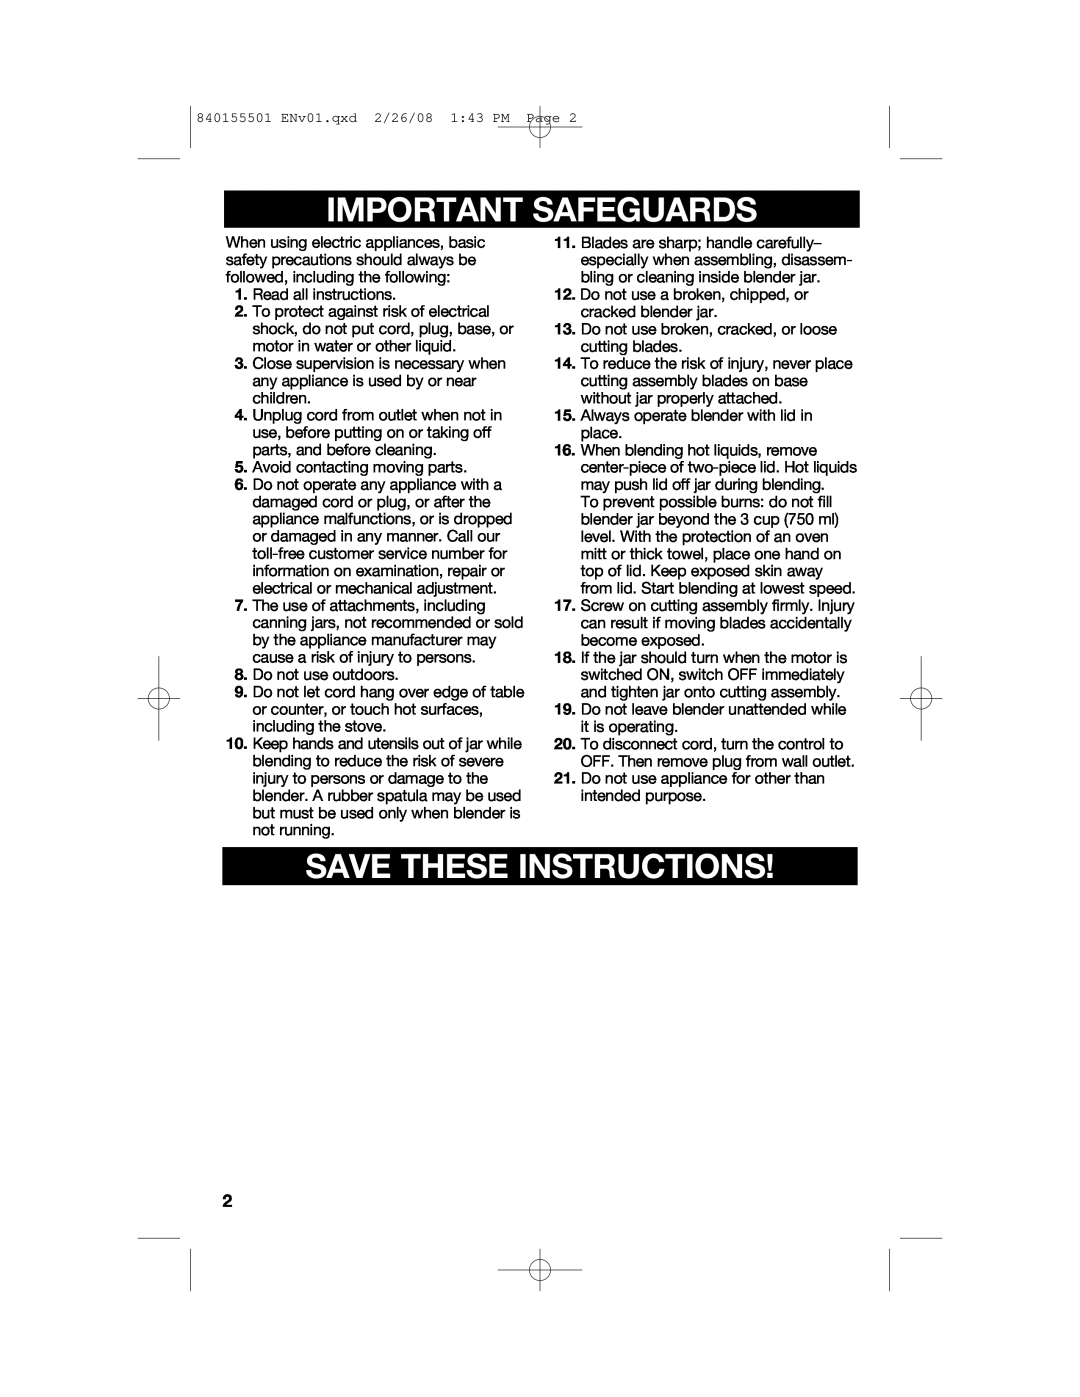 Hamilton Beach 54616C manual Important Safeguards, Save These Instructions 